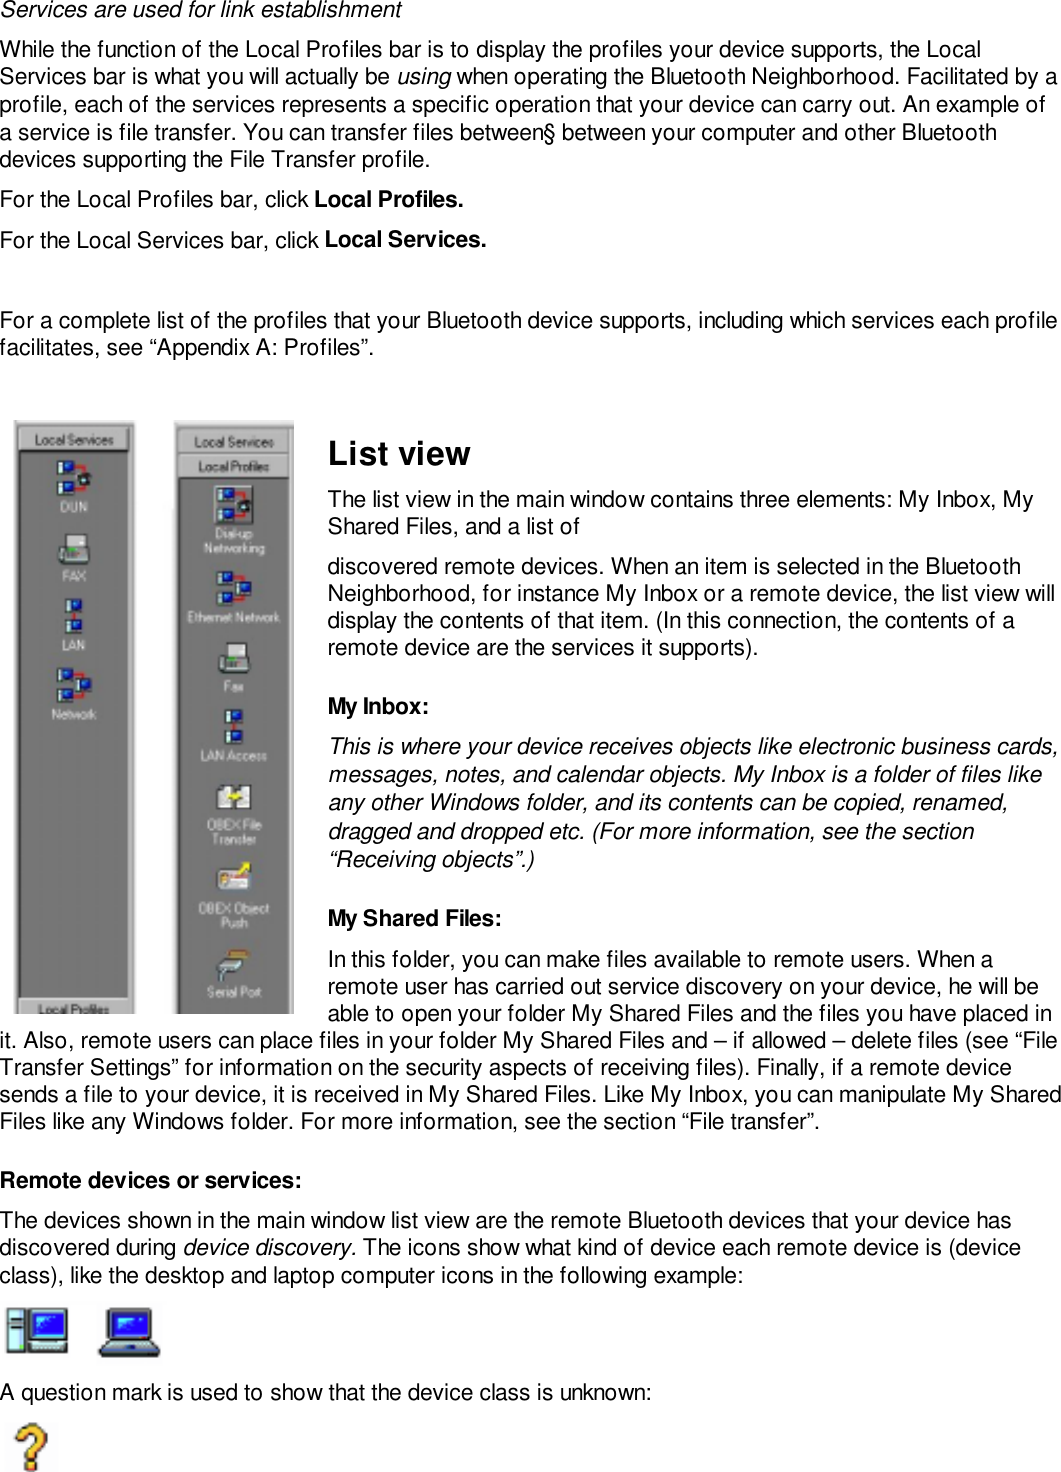 Services are used for link establishmentWhile the function of the Local Profiles bar is to display the profiles your device supports, the LocalServices bar is what you will actually be using when operating the Bluetooth Neighborhood. Facilitated by aprofile, each of the services represents a specific operation that your device can carry out. An example ofa service is file transfer. You can transfer files between§ between your computer and other Bluetoothdevices supporting the File Transfer profile.For the Local Profiles bar, click Local Profiles.For the Local Services bar, click Local Services.For a complete list of the profiles that your Bluetooth device supports, including which services each profilefacilitates, see “Appendix A: Profiles”.List viewThe list view in the main window contains three elements: My Inbox, MyShared Files, and a list ofdiscovered remote devices. When an item is selected in the BluetoothNeighborhood, for instance My Inbox or a remote device, the list view willdisplay the contents of that item. (In this connection, the contents of aremote device are the services it supports).My Inbox:This is where your device receives objects like electronic business cards,messages, notes, and calendar objects. My Inbox is a folder of files likeany other Windows folder, and its contents can be copied, renamed,dragged and dropped etc. (For more information, see the section“Receiving objects”.)My Shared Files:In this folder, you can make files available to remote users. When aremote user has carried out service discovery on your device, he will beable to open your folder My Shared Files and the files you have placed init. Also, remote users can place files in your folder My Shared Files and – if allowed – delete files (see “FileTransfer Settings” for information on the security aspects of receiving files). Finally, if a remote devicesends a file to your device, it is received in My Shared Files. Like My Inbox, you can manipulate My SharedFiles like any Windows folder. For more information, see the section “File transfer”.Remote devices or services:The devices shown in the main window list view are the remote Bluetooth devices that your device hasdiscovered during device discovery. The icons show what kind of device each remote device is (deviceclass), like the desktop and laptop computer icons in the following example:A question mark is used to show that the device class is unknown: